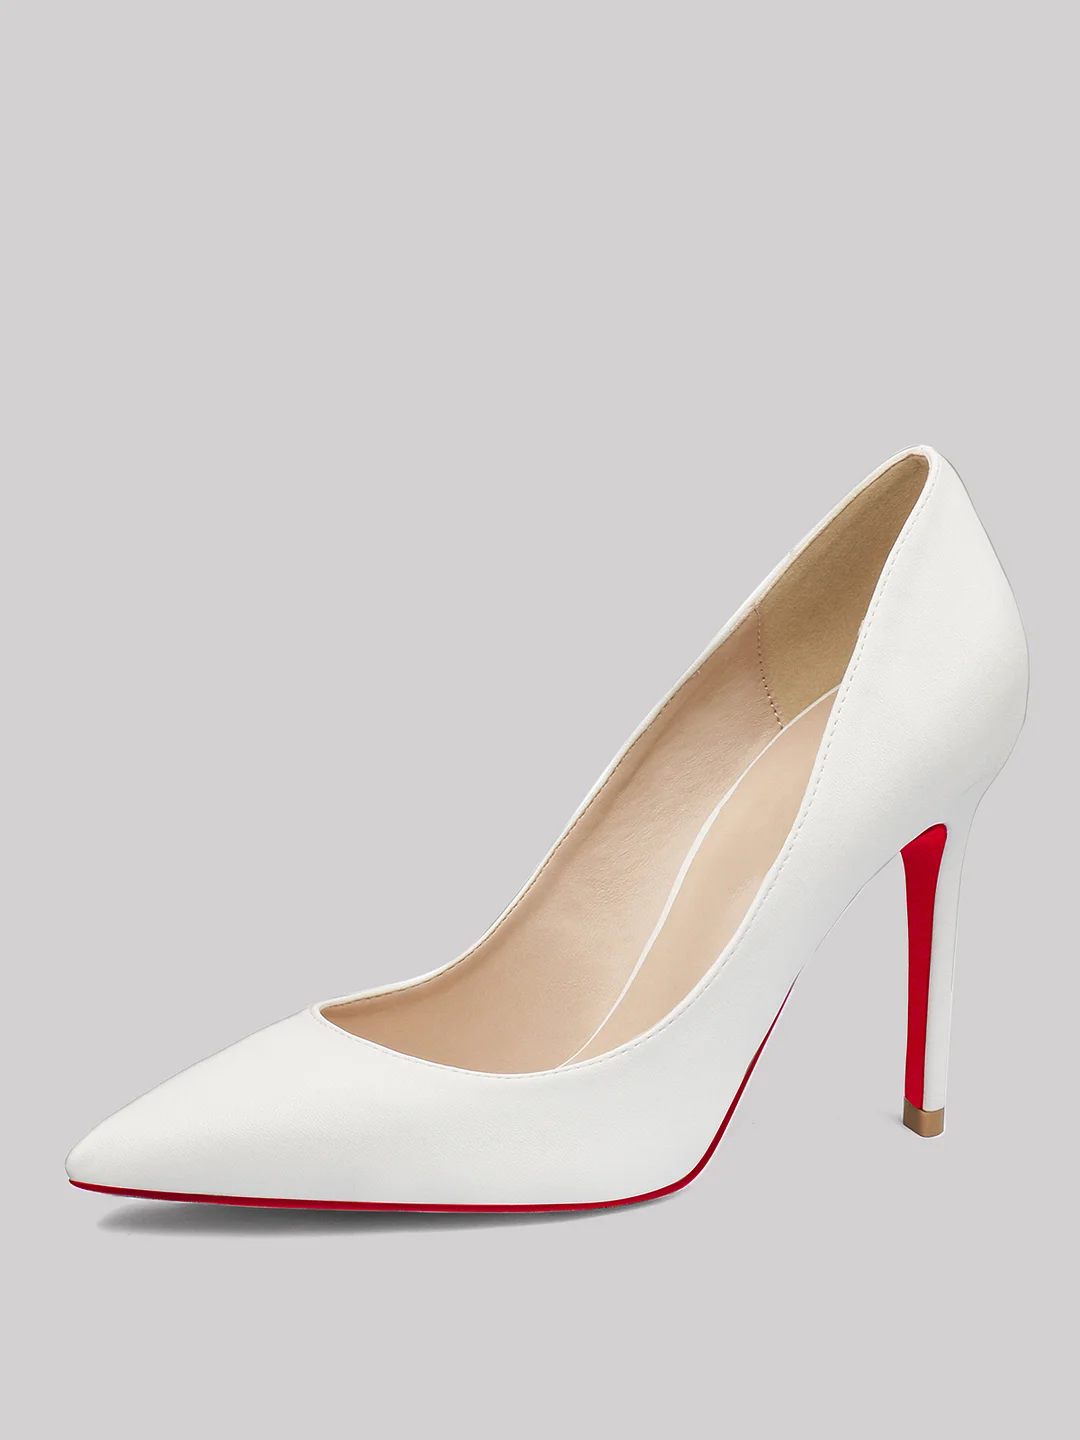 90mm Women's Middle Heels Pointy Toe Red Bottom Pumps